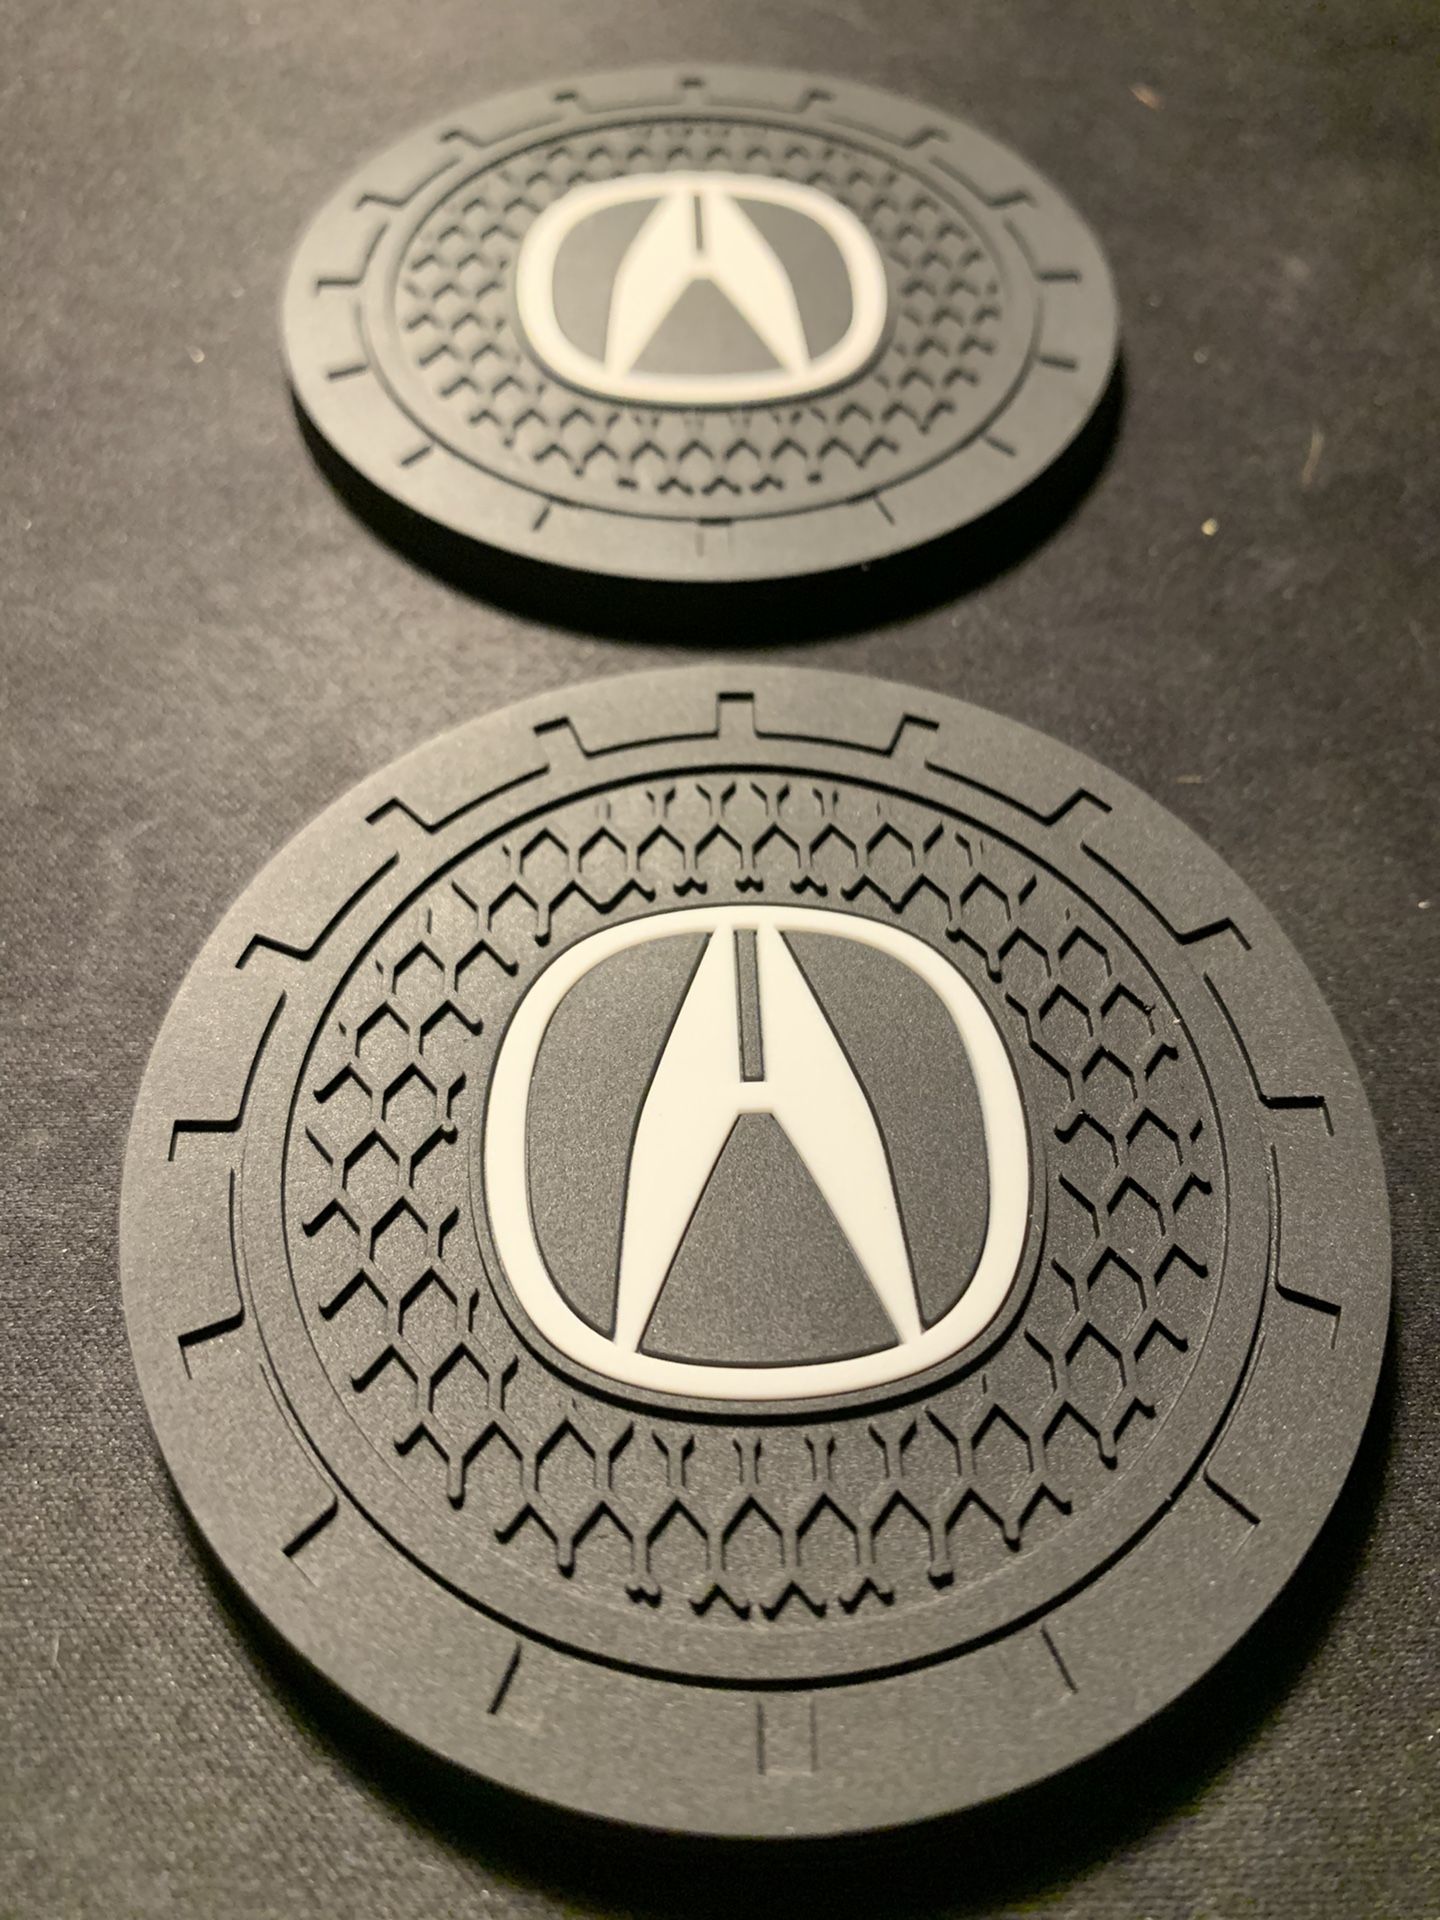 Acura Car Cup Coasters (set of 2)